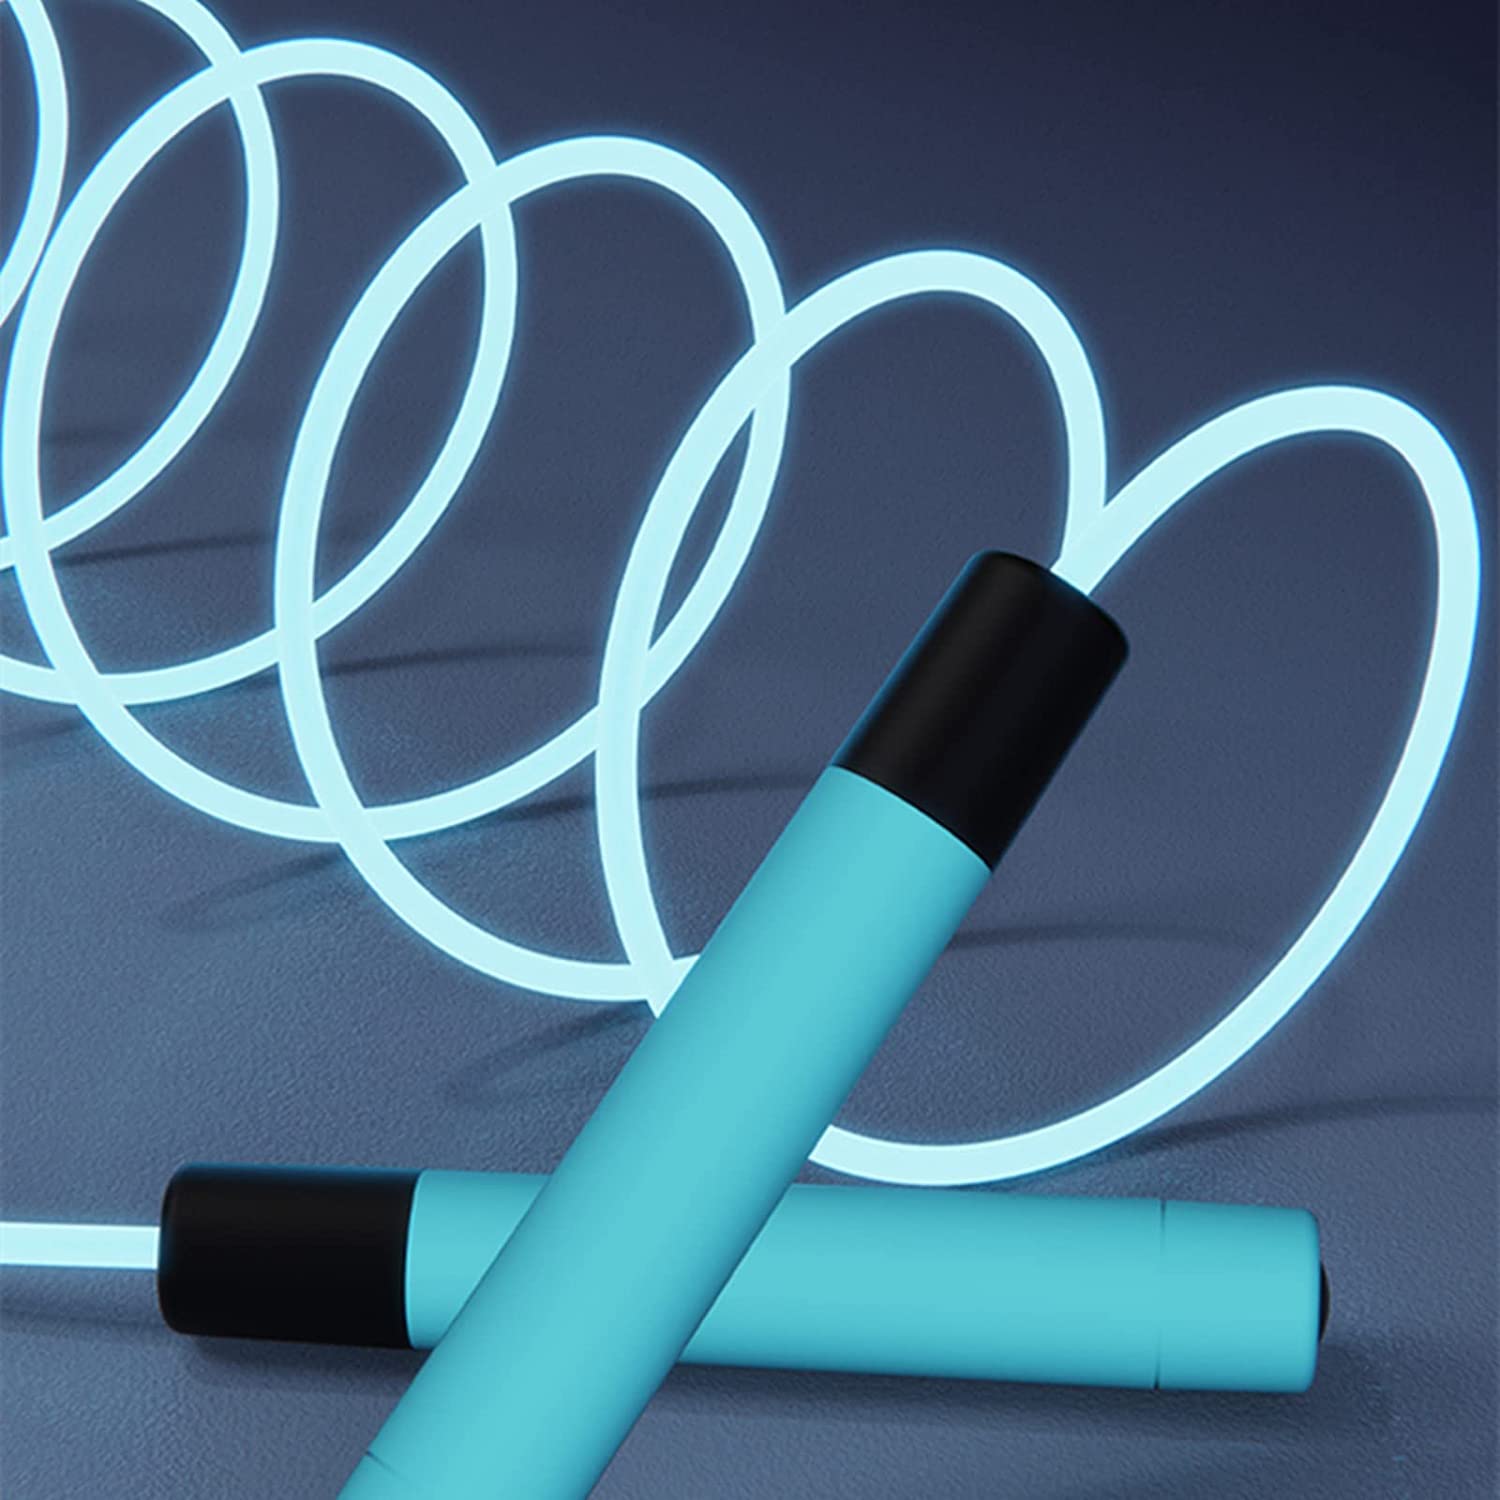 Night Sports Colorful Fitness Training Skipping Glow In The Dark Kid Led Jumprope Gift For Kids And Adult Led Jump Rope Skipping